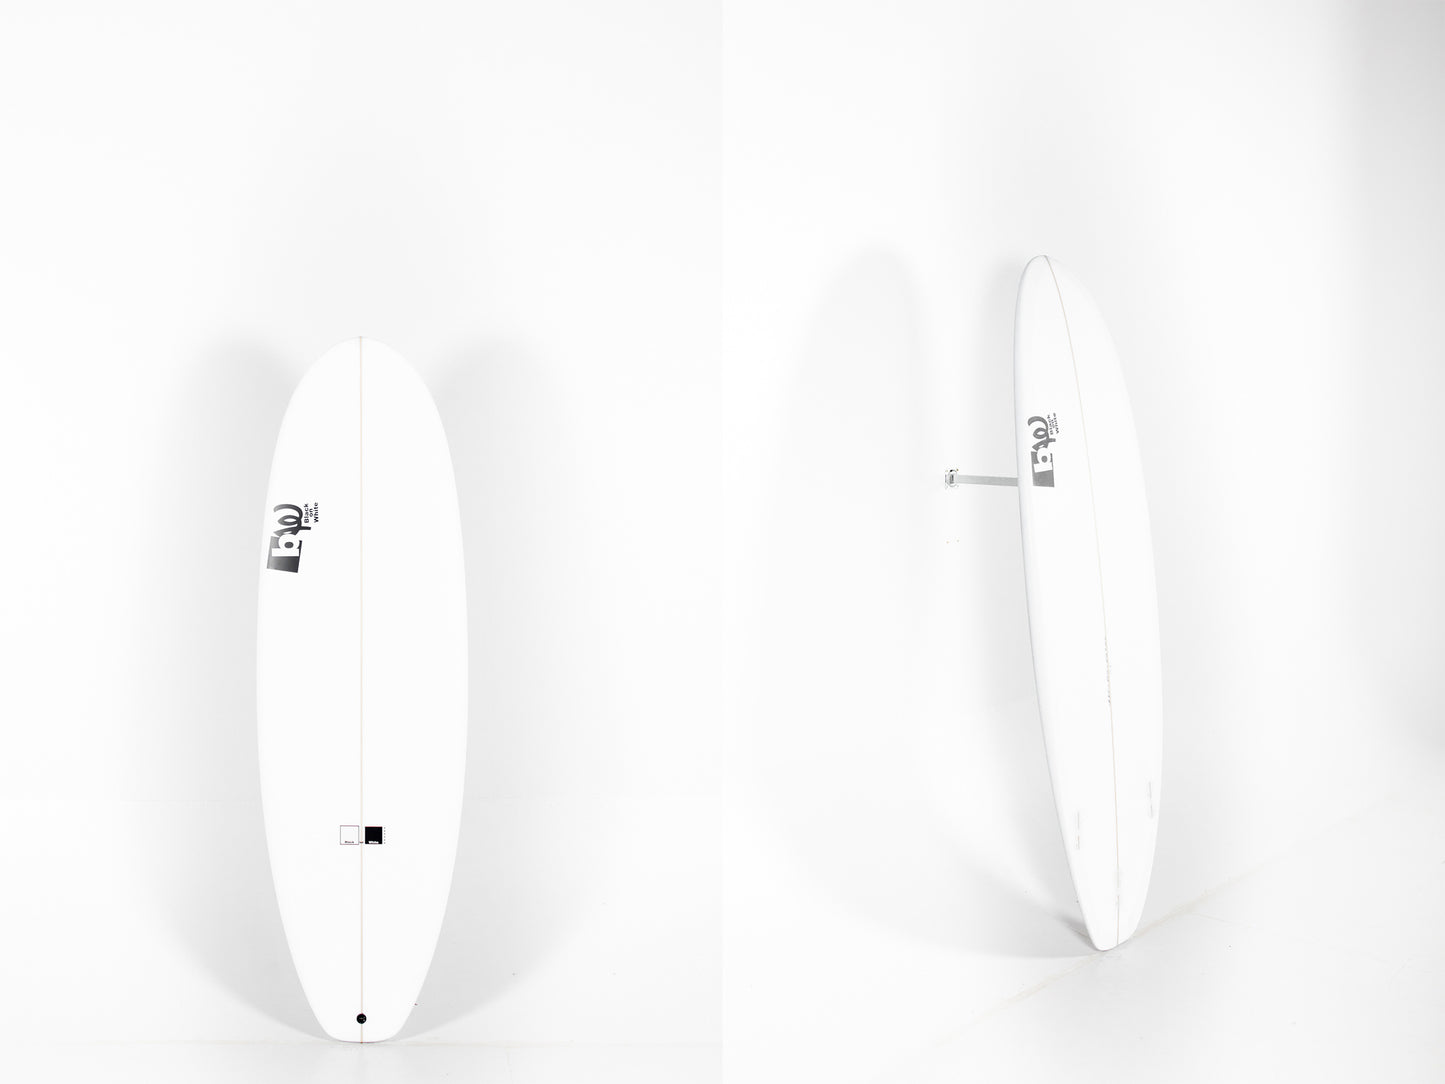 
                  
                    BW SURFBOARDS - BW SURFBOARDS Potato 6'2" x 22 1/2 x 2 5/8 x 44.7L. at PUKAS SURF SHOP
                  
                